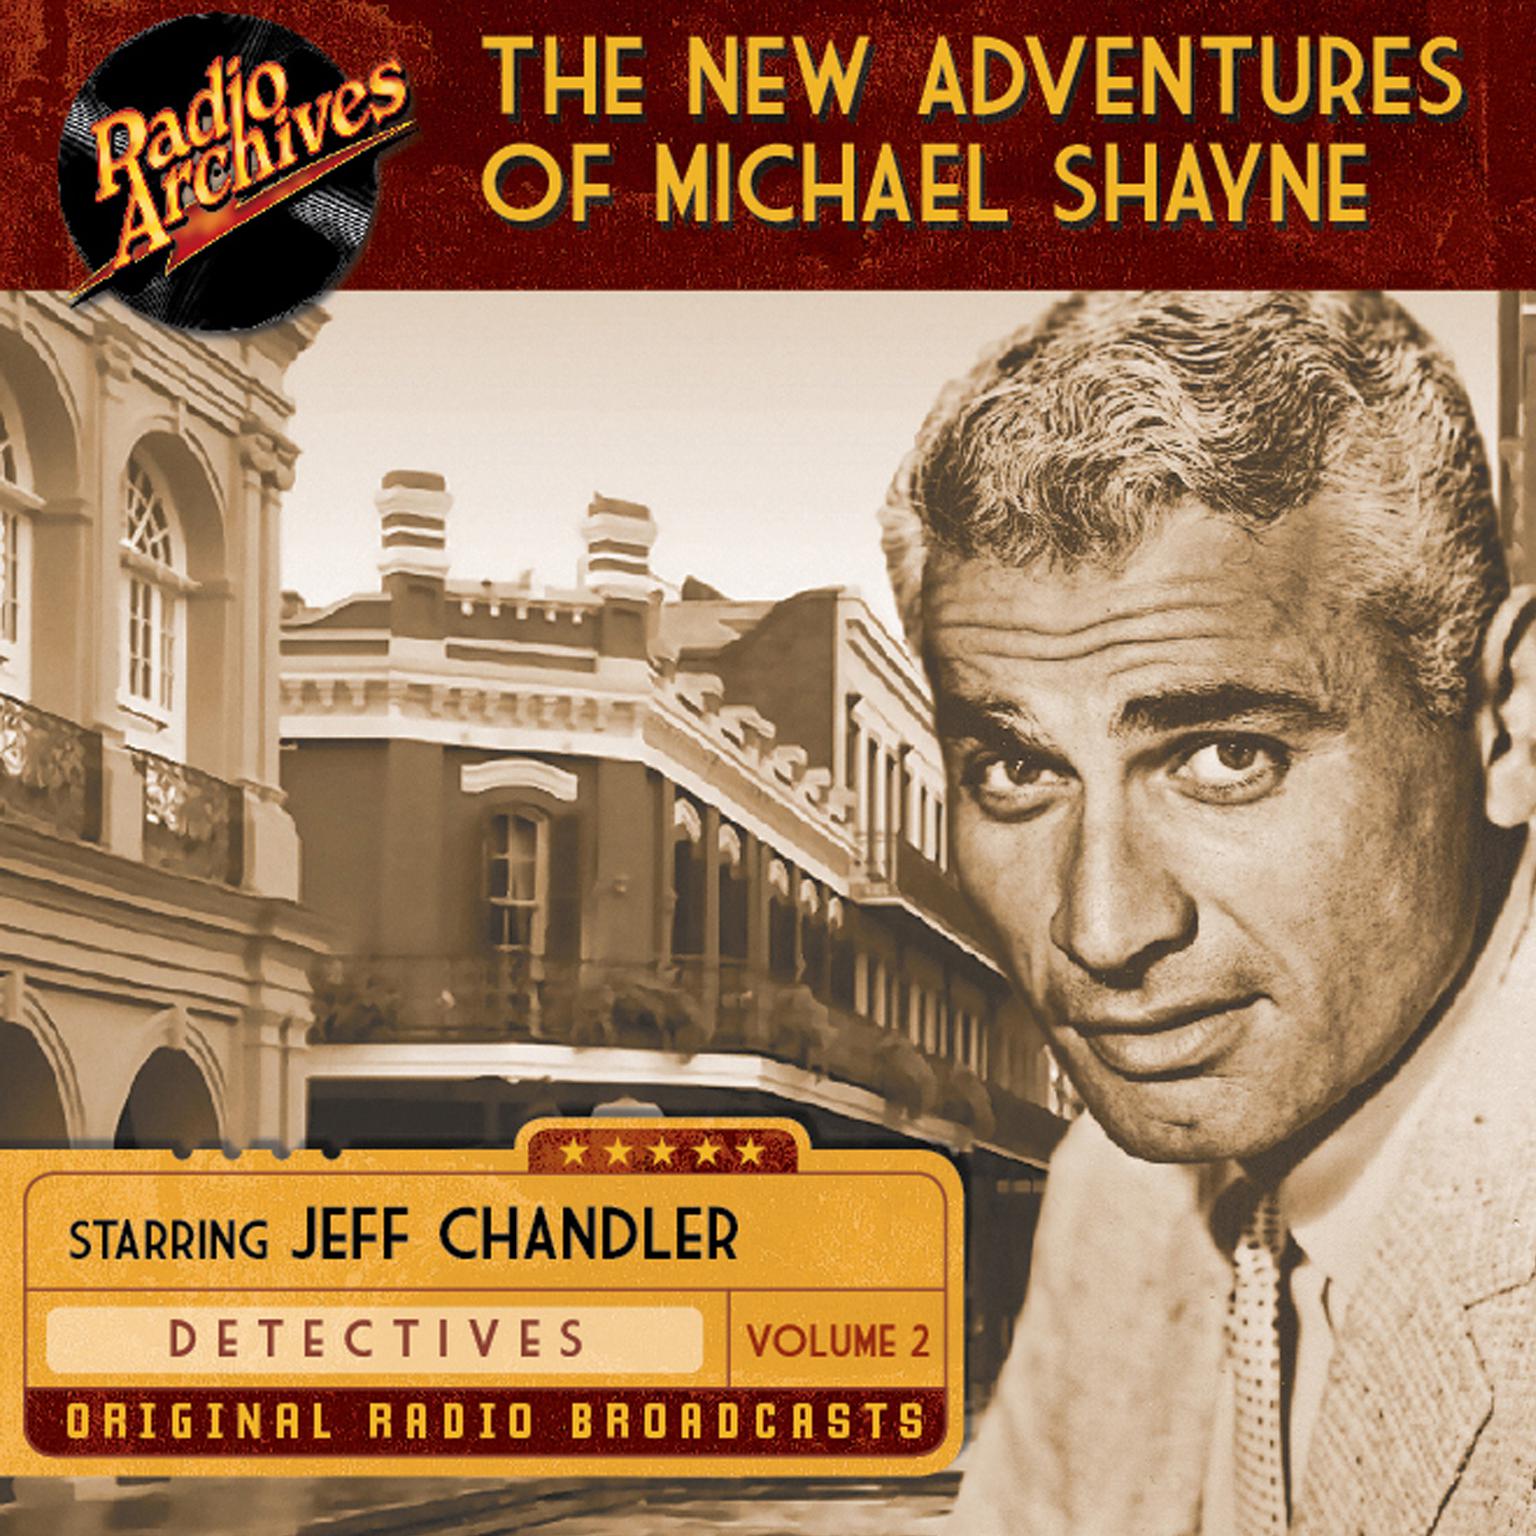 New Adventures of Michael Shayne, Volume 2 Audiobook, by various authors